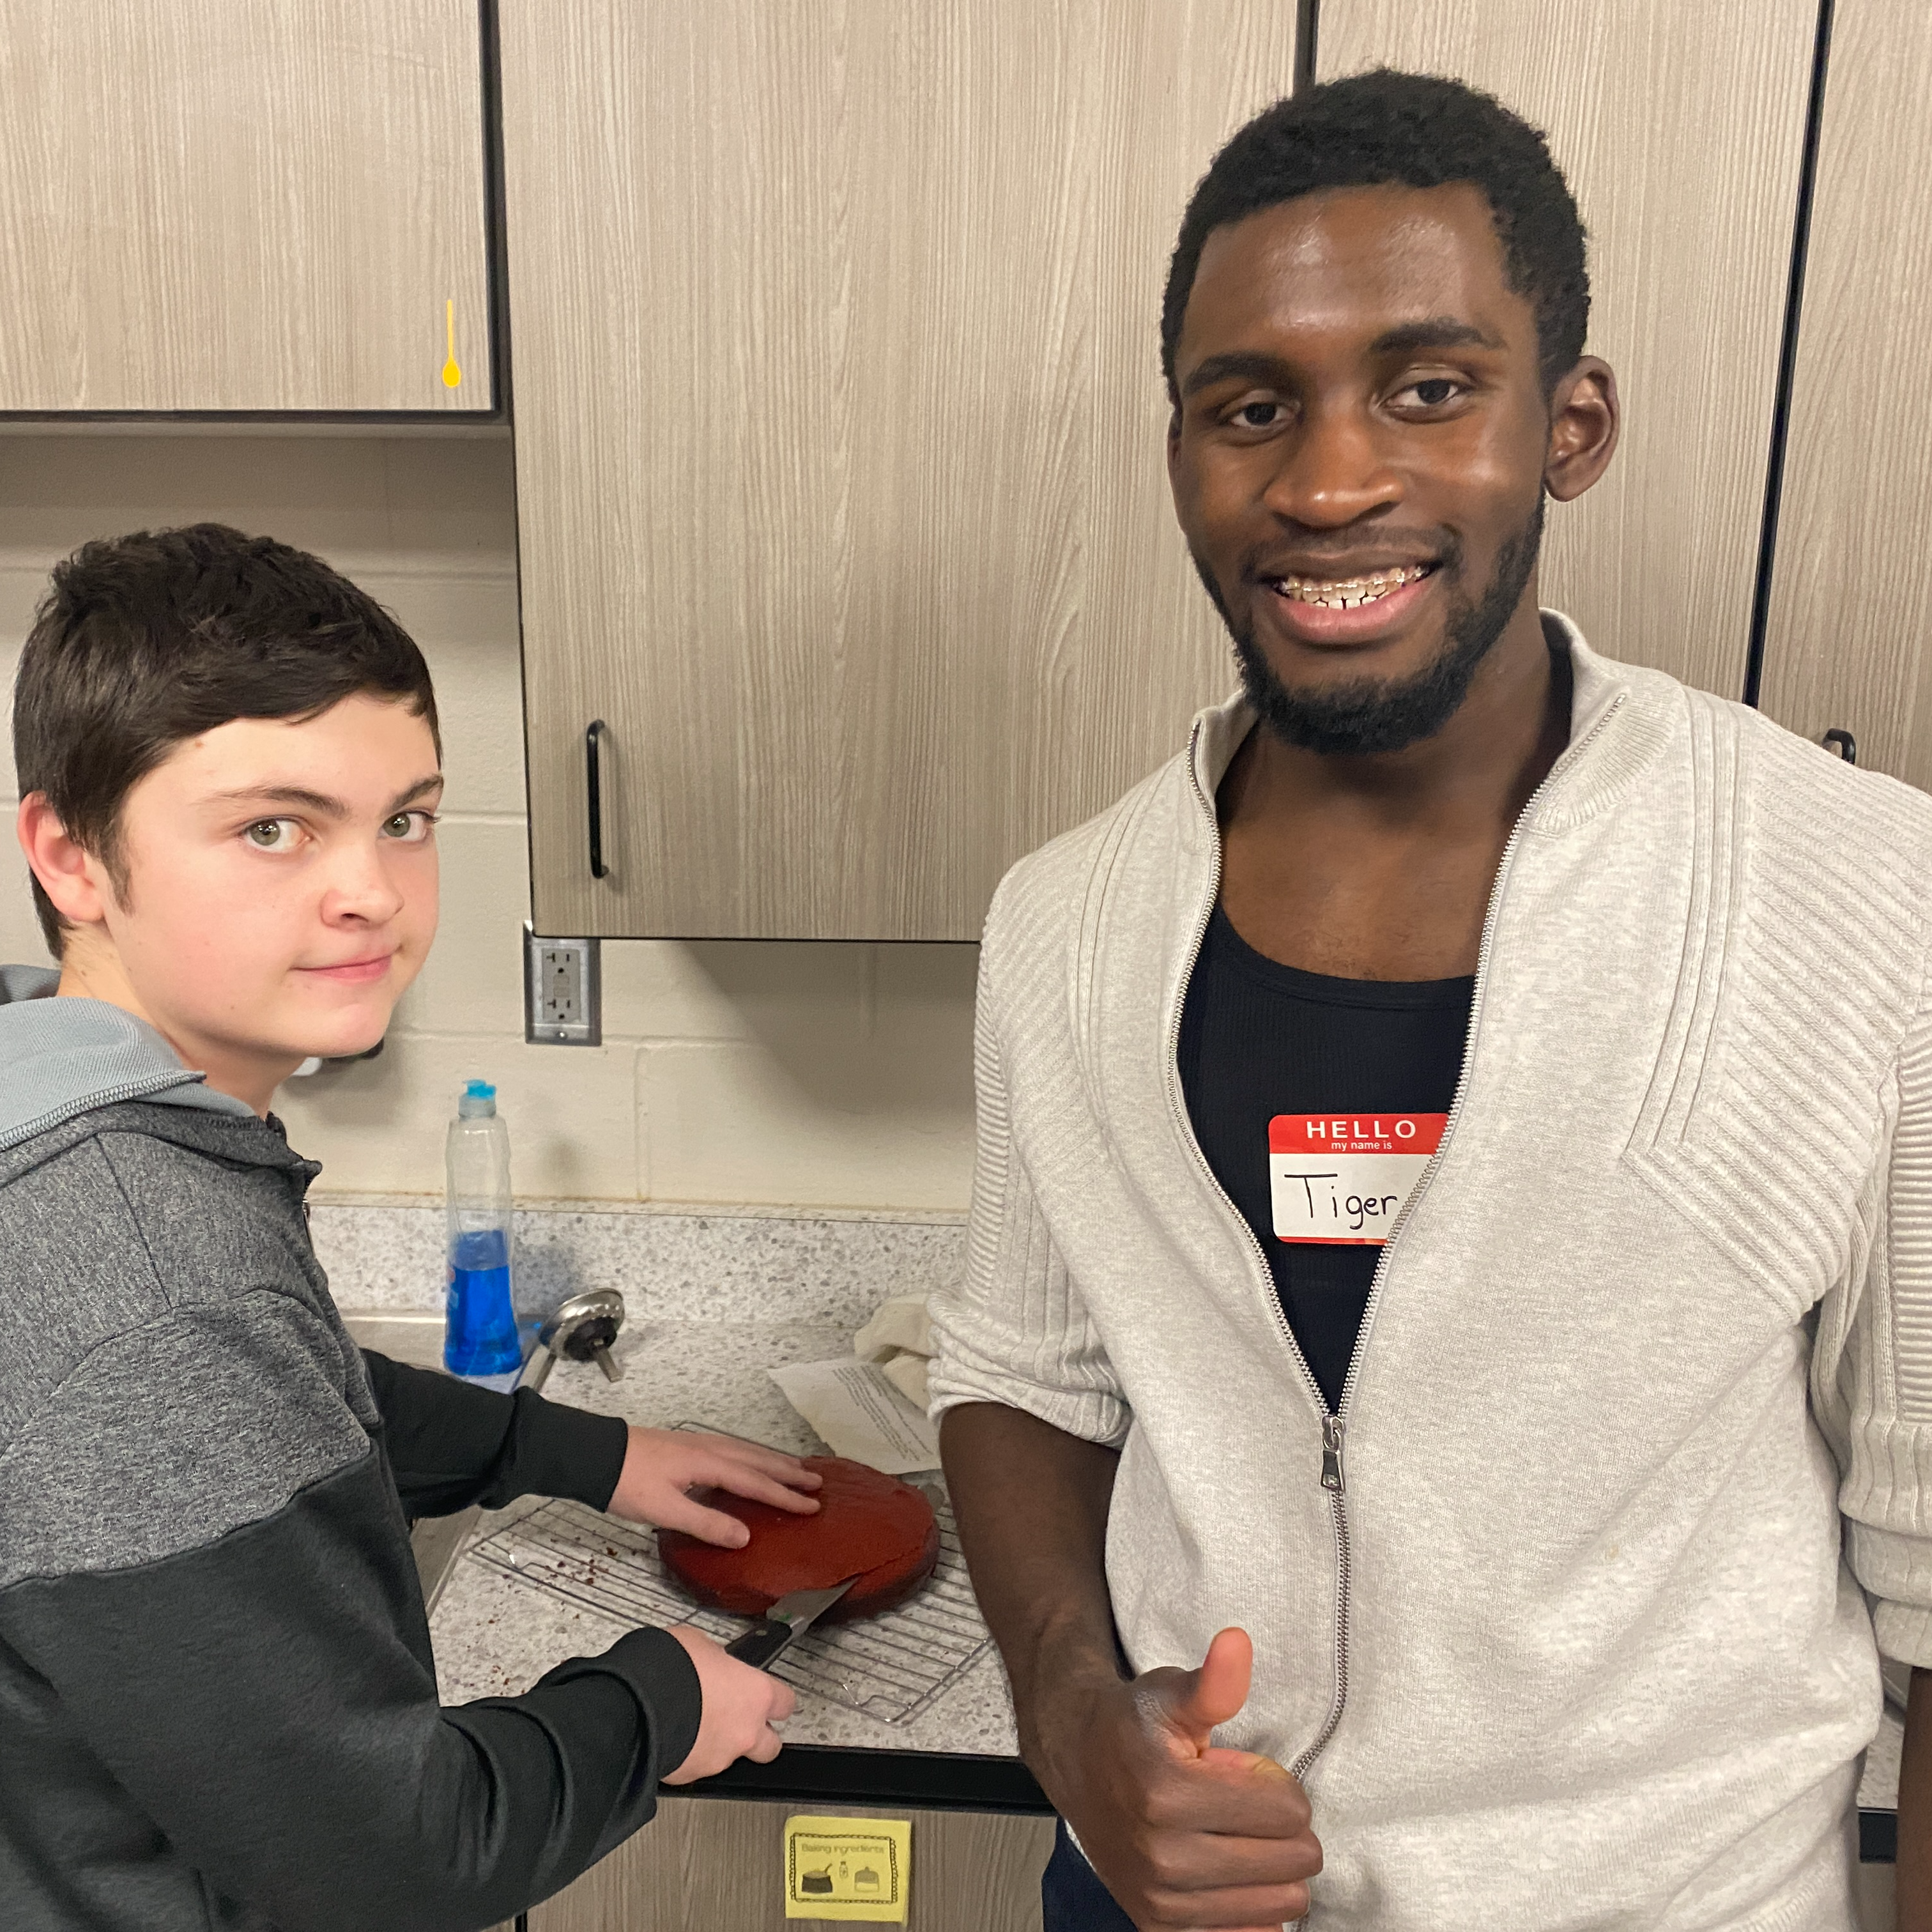 Tiger, an MHS mentor works with a middle school student at the cooking club